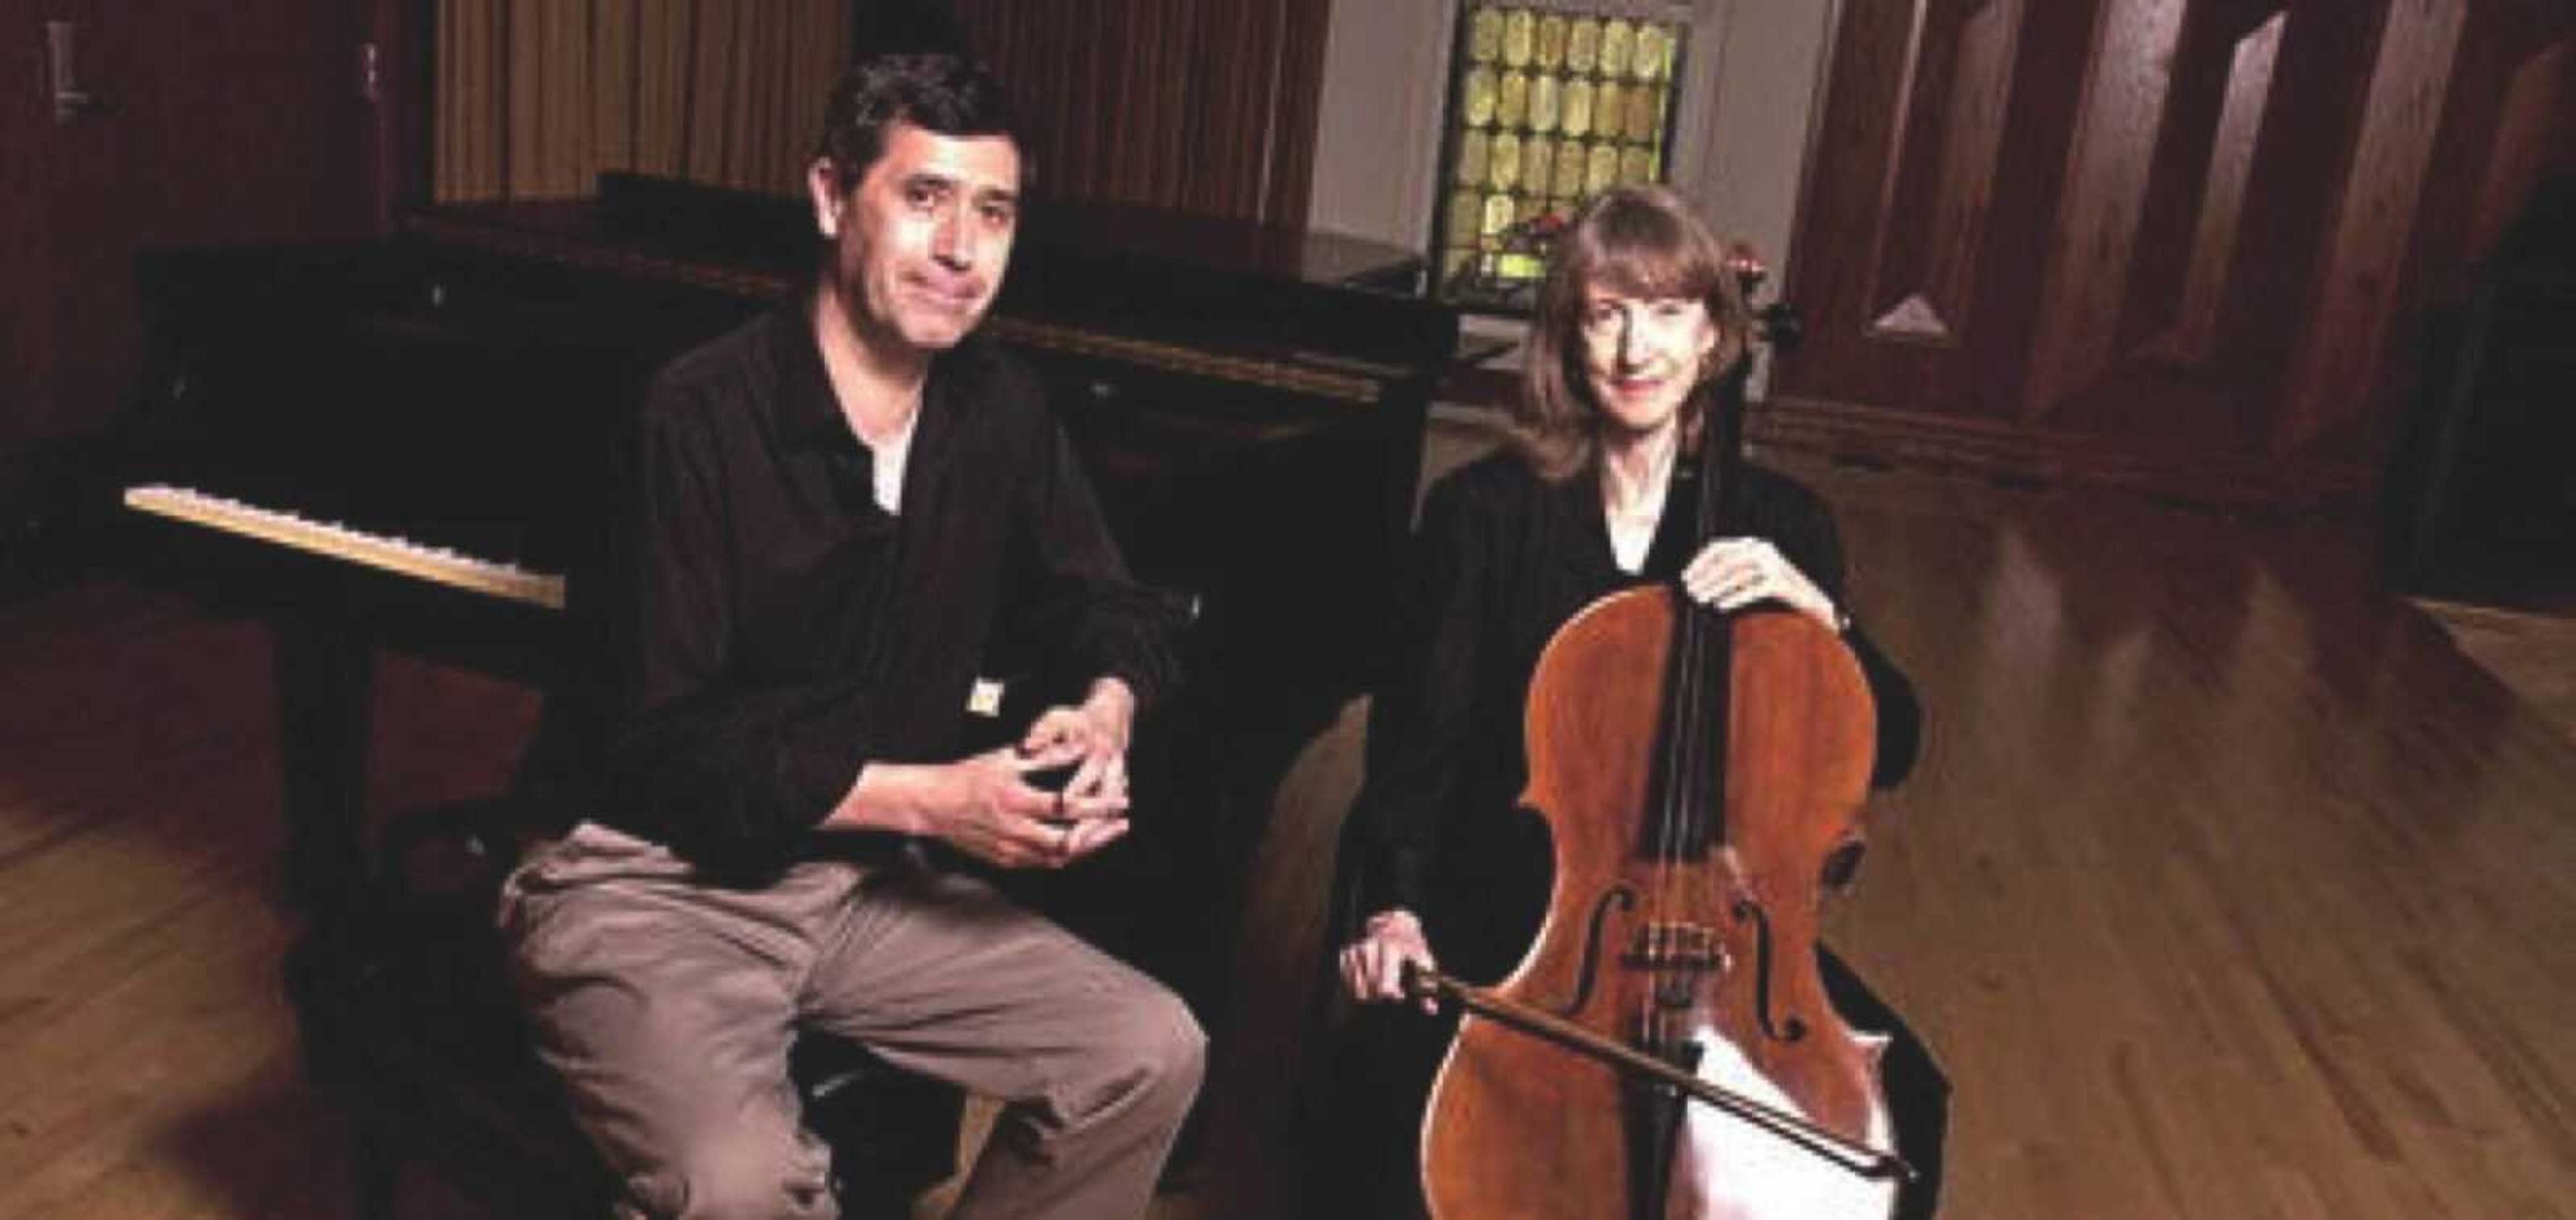 Paul Thompson and Dr. Sara Edgerton, music faculty husband and wife, will perform Gavin Bryars' "The South Downs" together at "Terry Riley's In C and Other Minimalist Works."